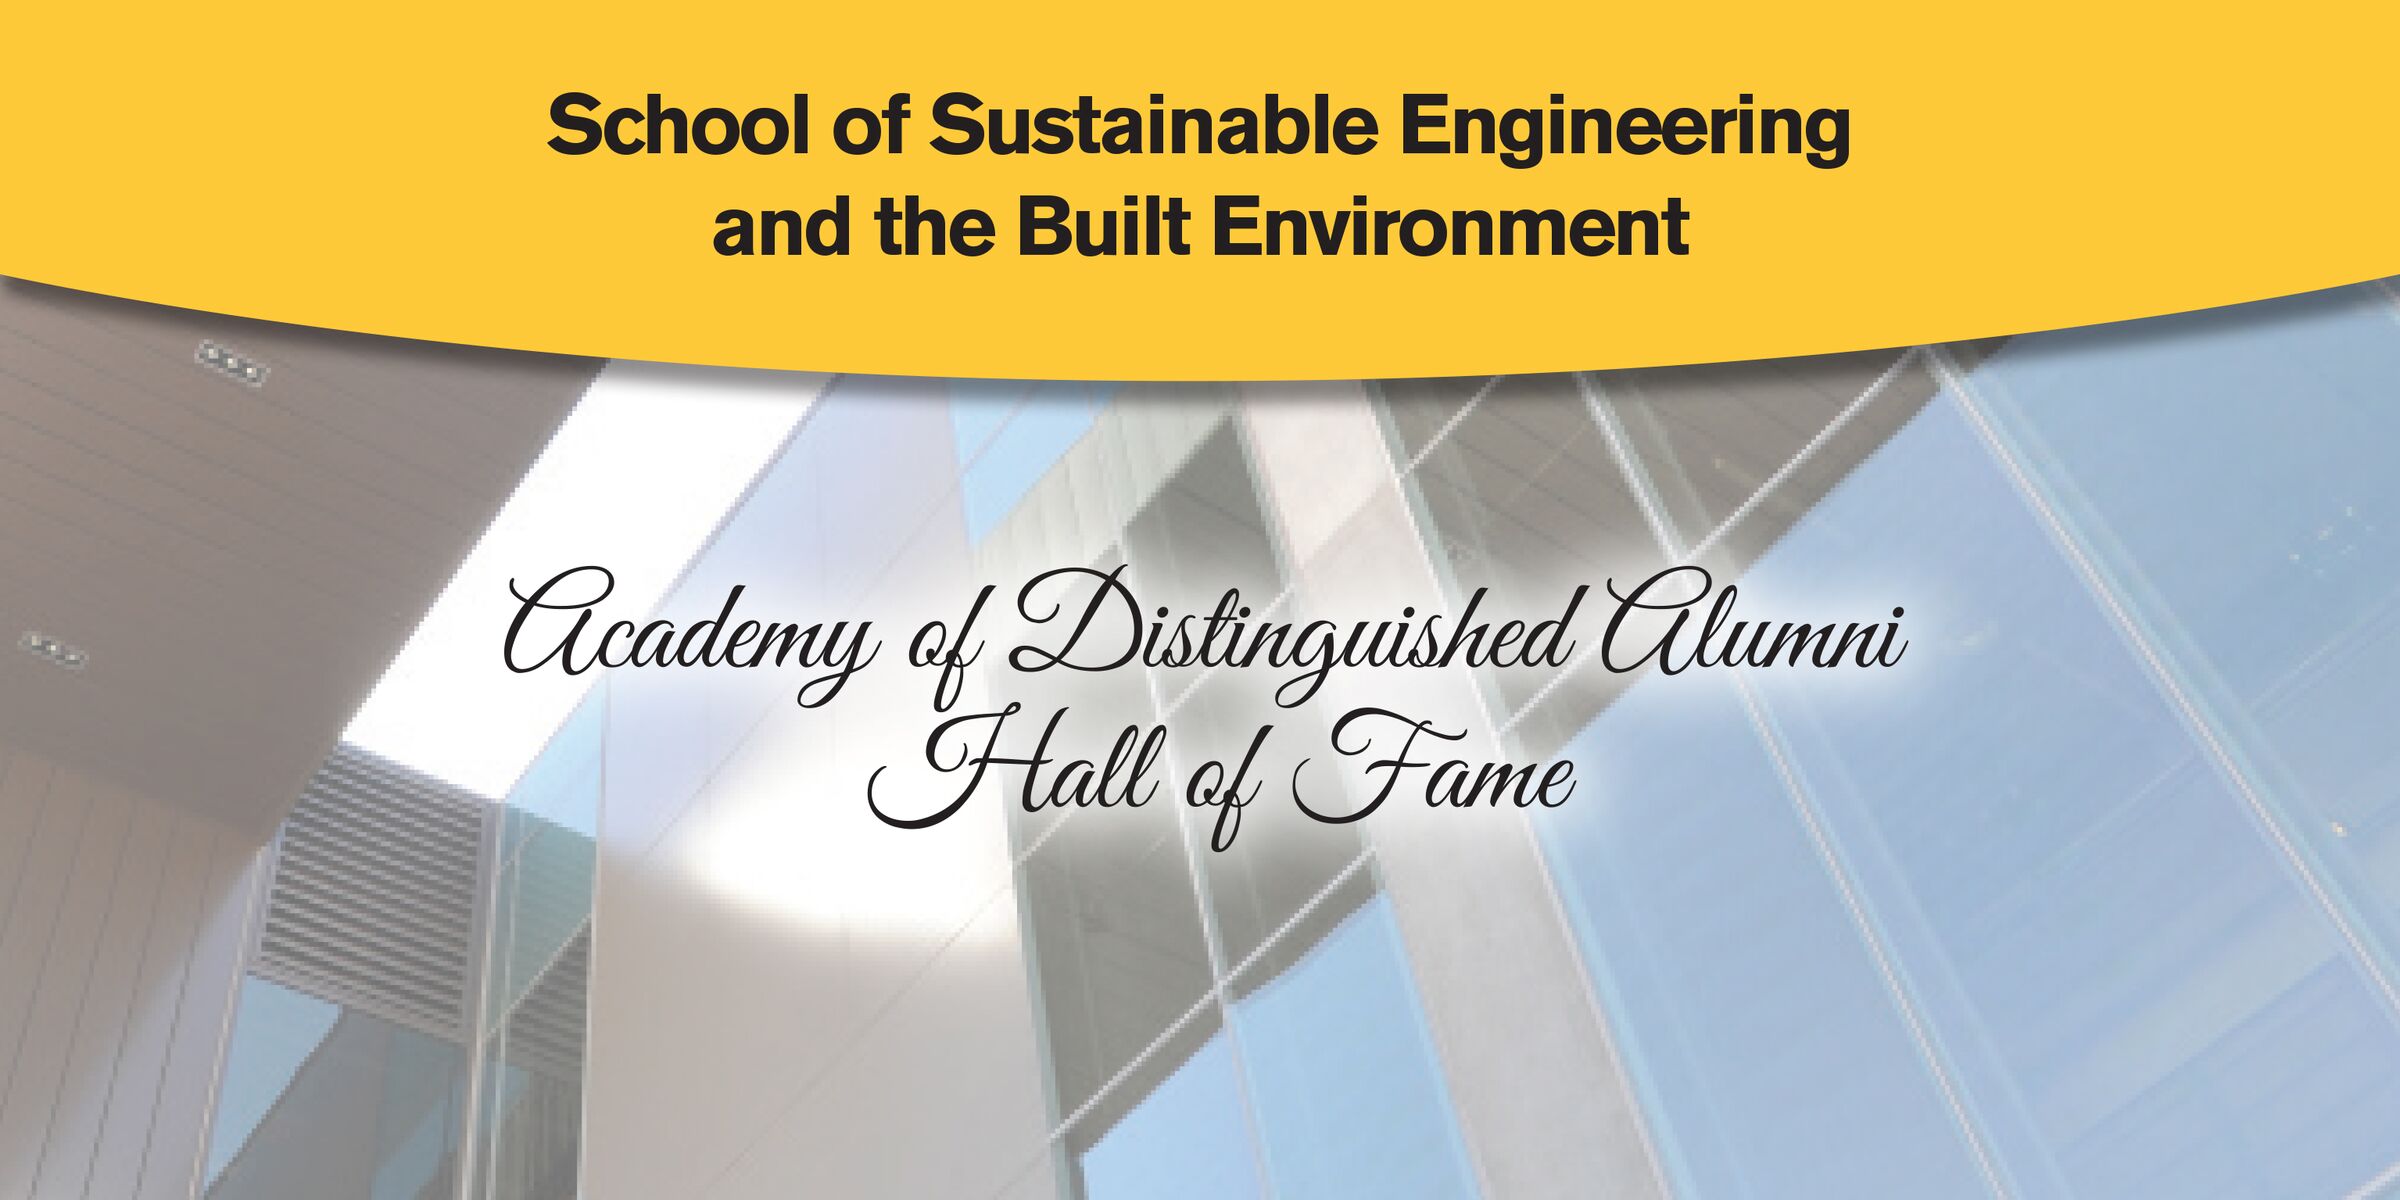 School of Sustainable Engineering and the Built Environment's  Academy of Distinguished Alumni Hall of Fame